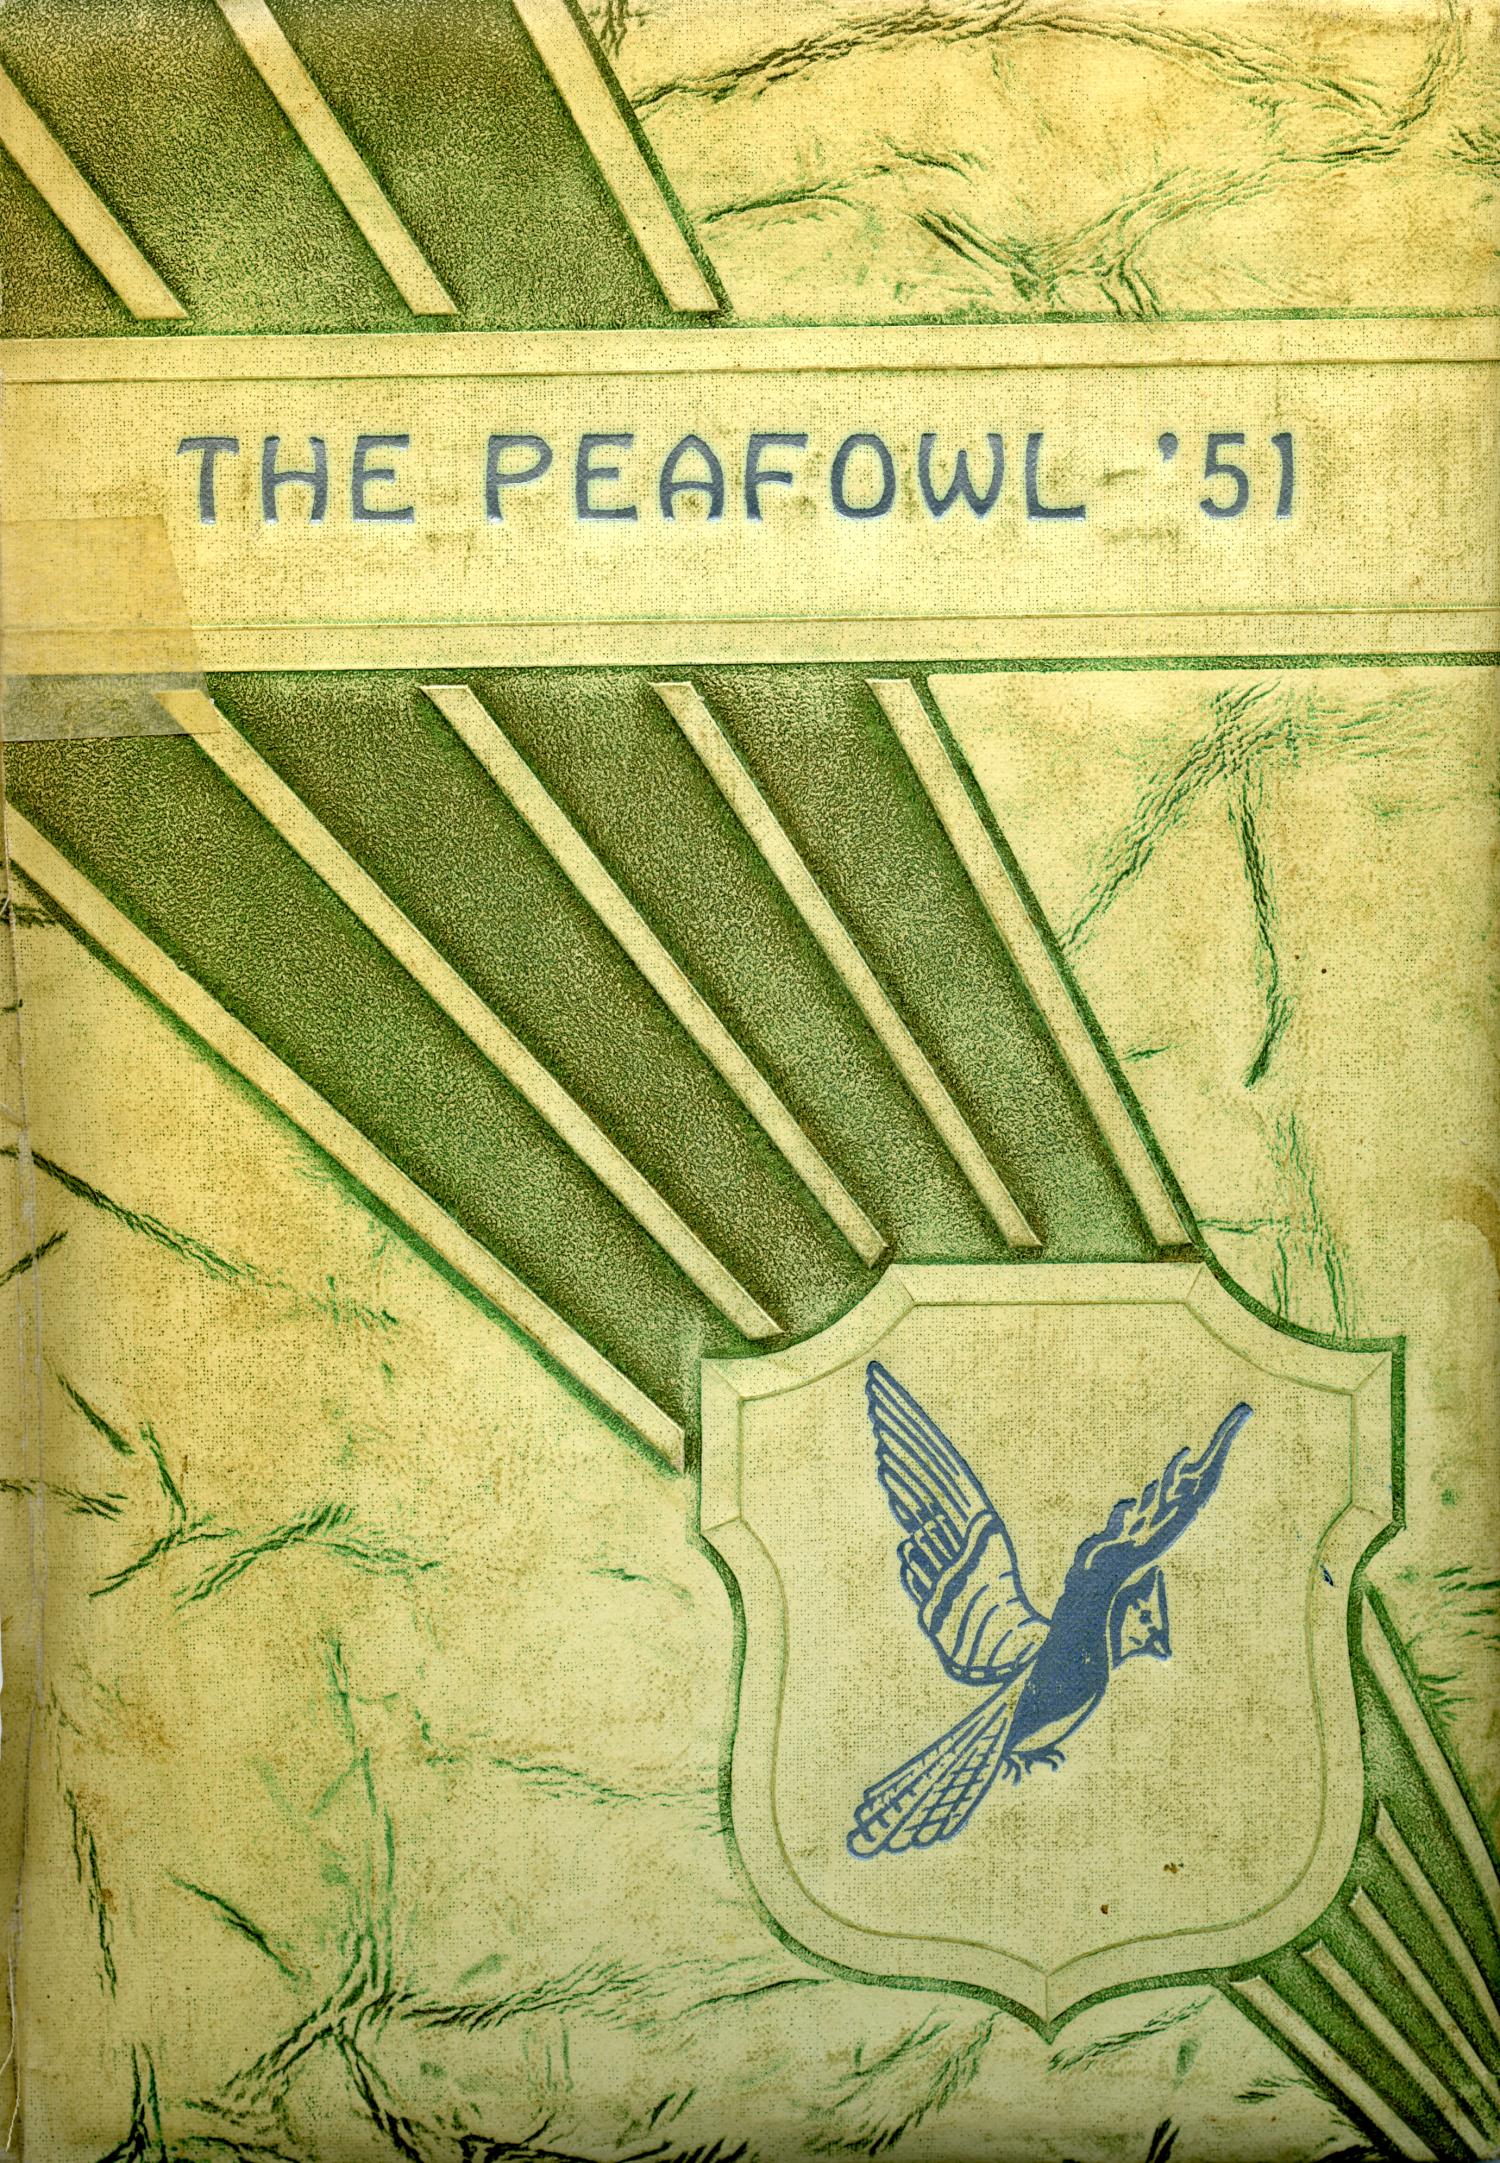 The Peafowl, Yearbook of Peacock High School, 1951
                                                
                                                    Front Cover
                                                